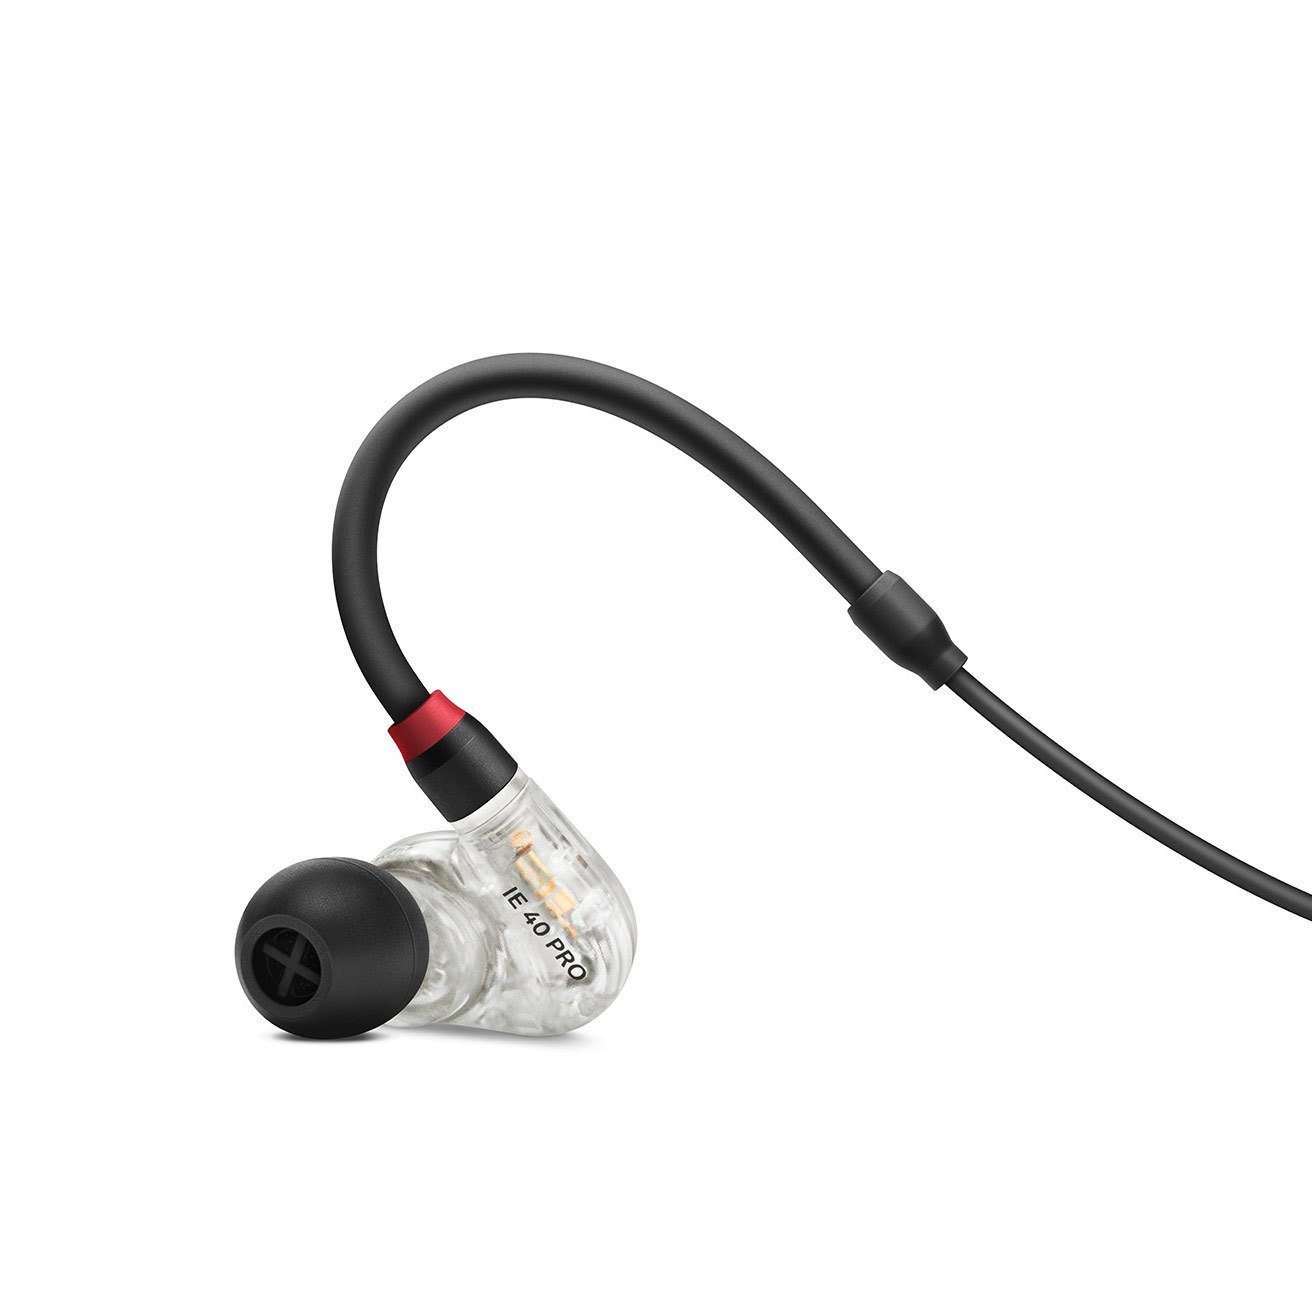 Sennheiser Ie 40 Pro Clear - Ecouteur Intra-auriculaire - Variation 2